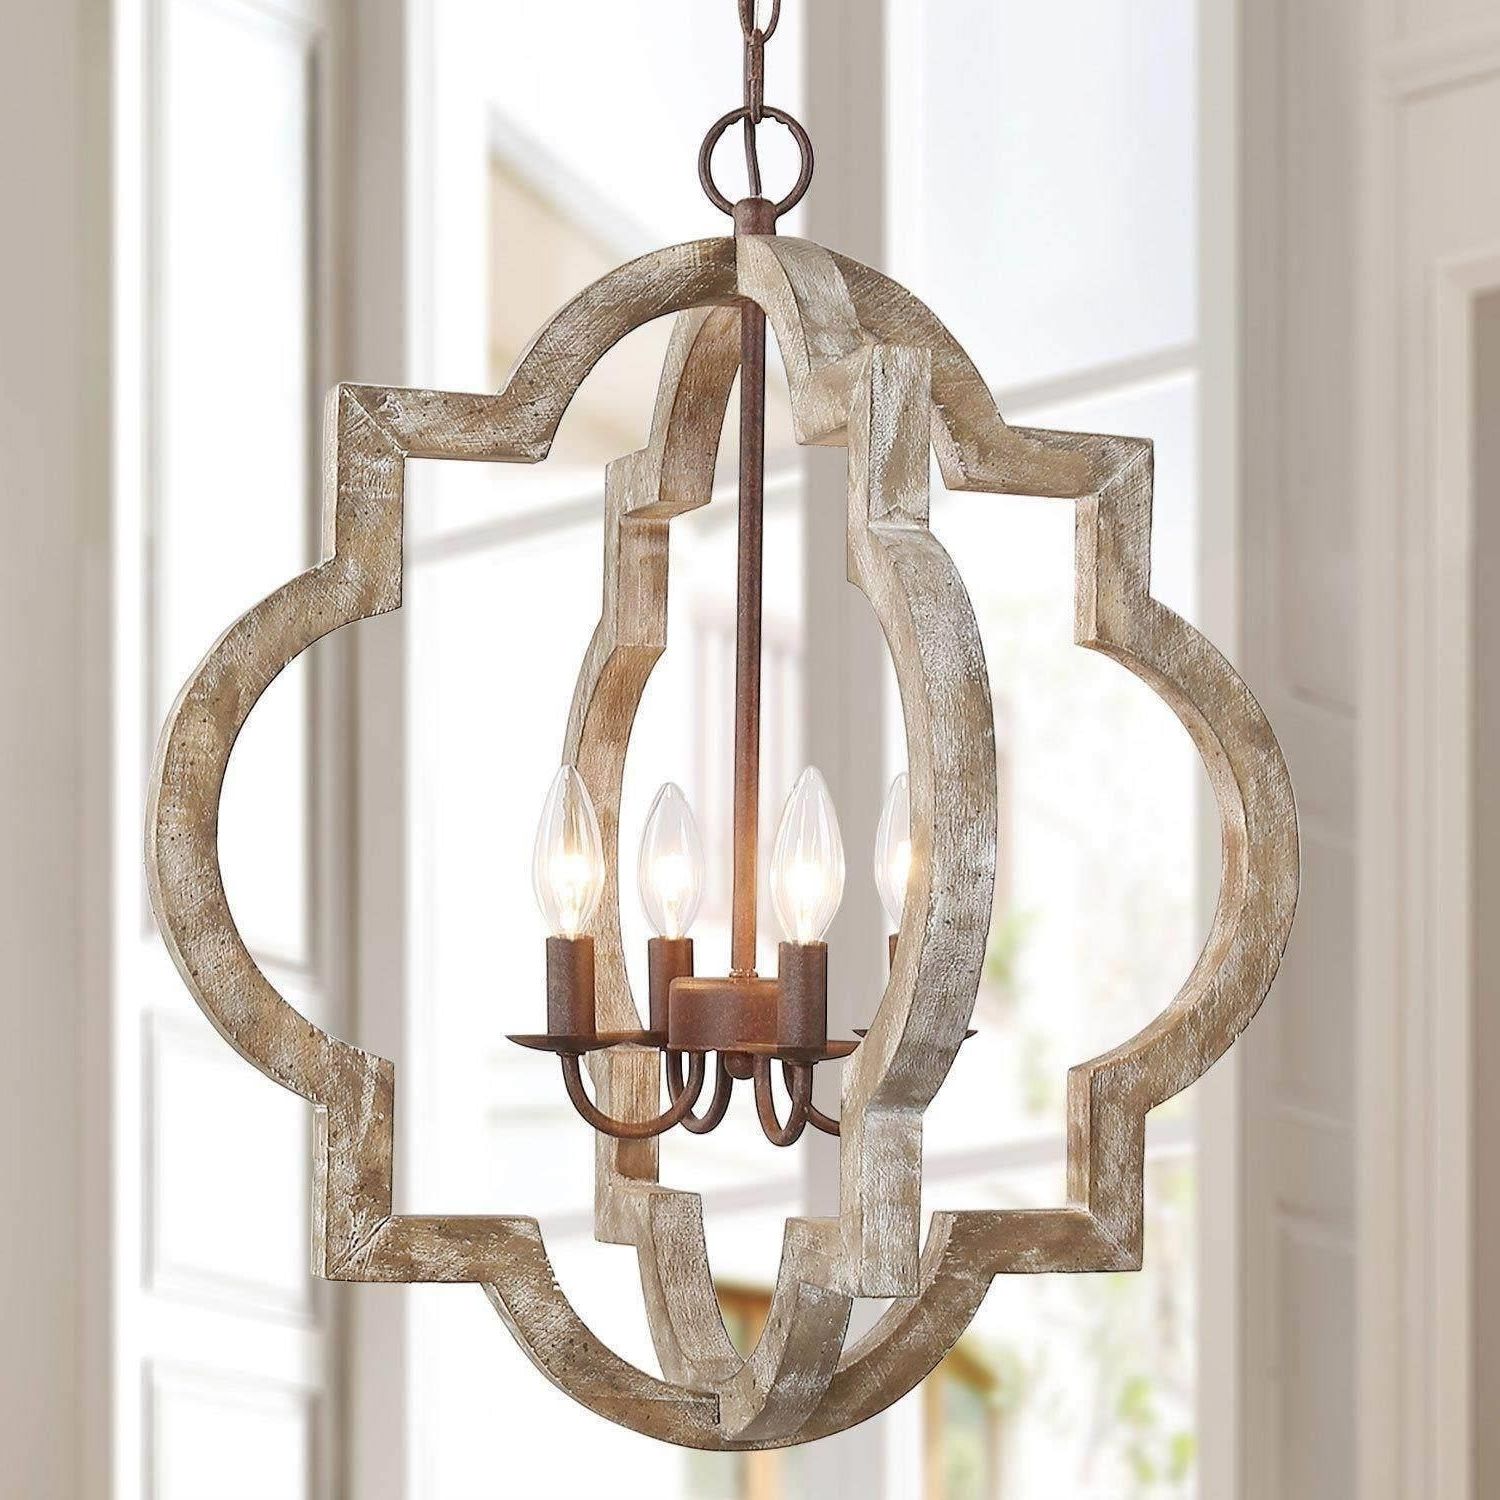 Famous Rustic Gray Lantern Chandeliers For The Gray Barn Farmhouse Rustic 4 Light Distressed Wood Modern Lantern  Chandelier For Living Room – On Sale – Overstock –  (View 10 of 10)